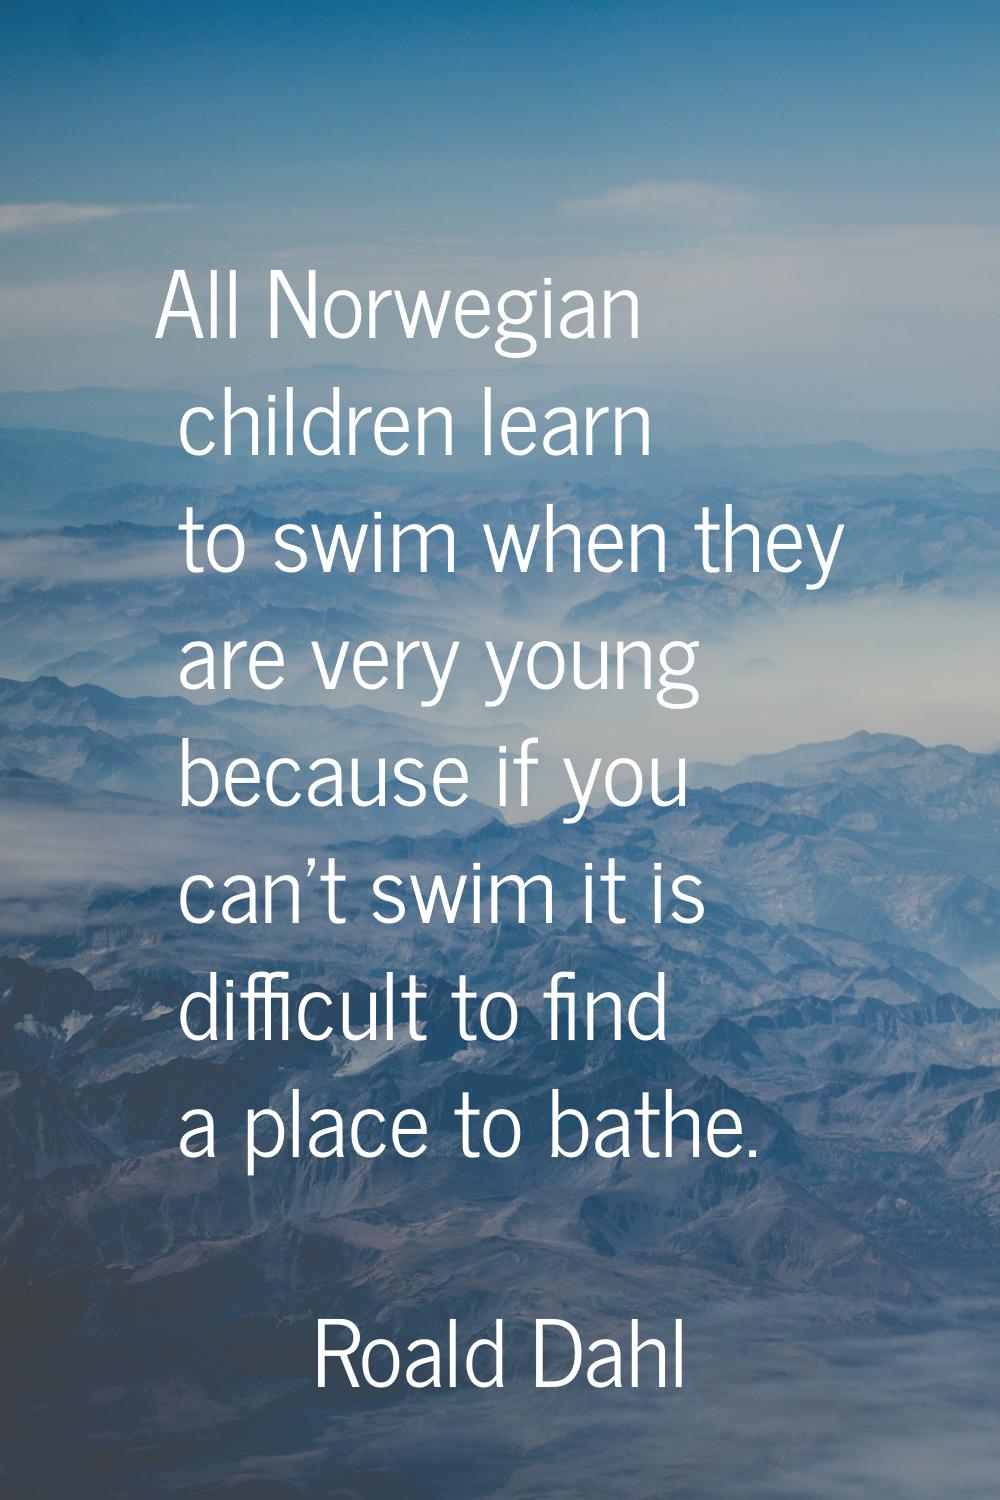 All Norwegian children learn to swim when they are very young because if you can't swim it is diffi